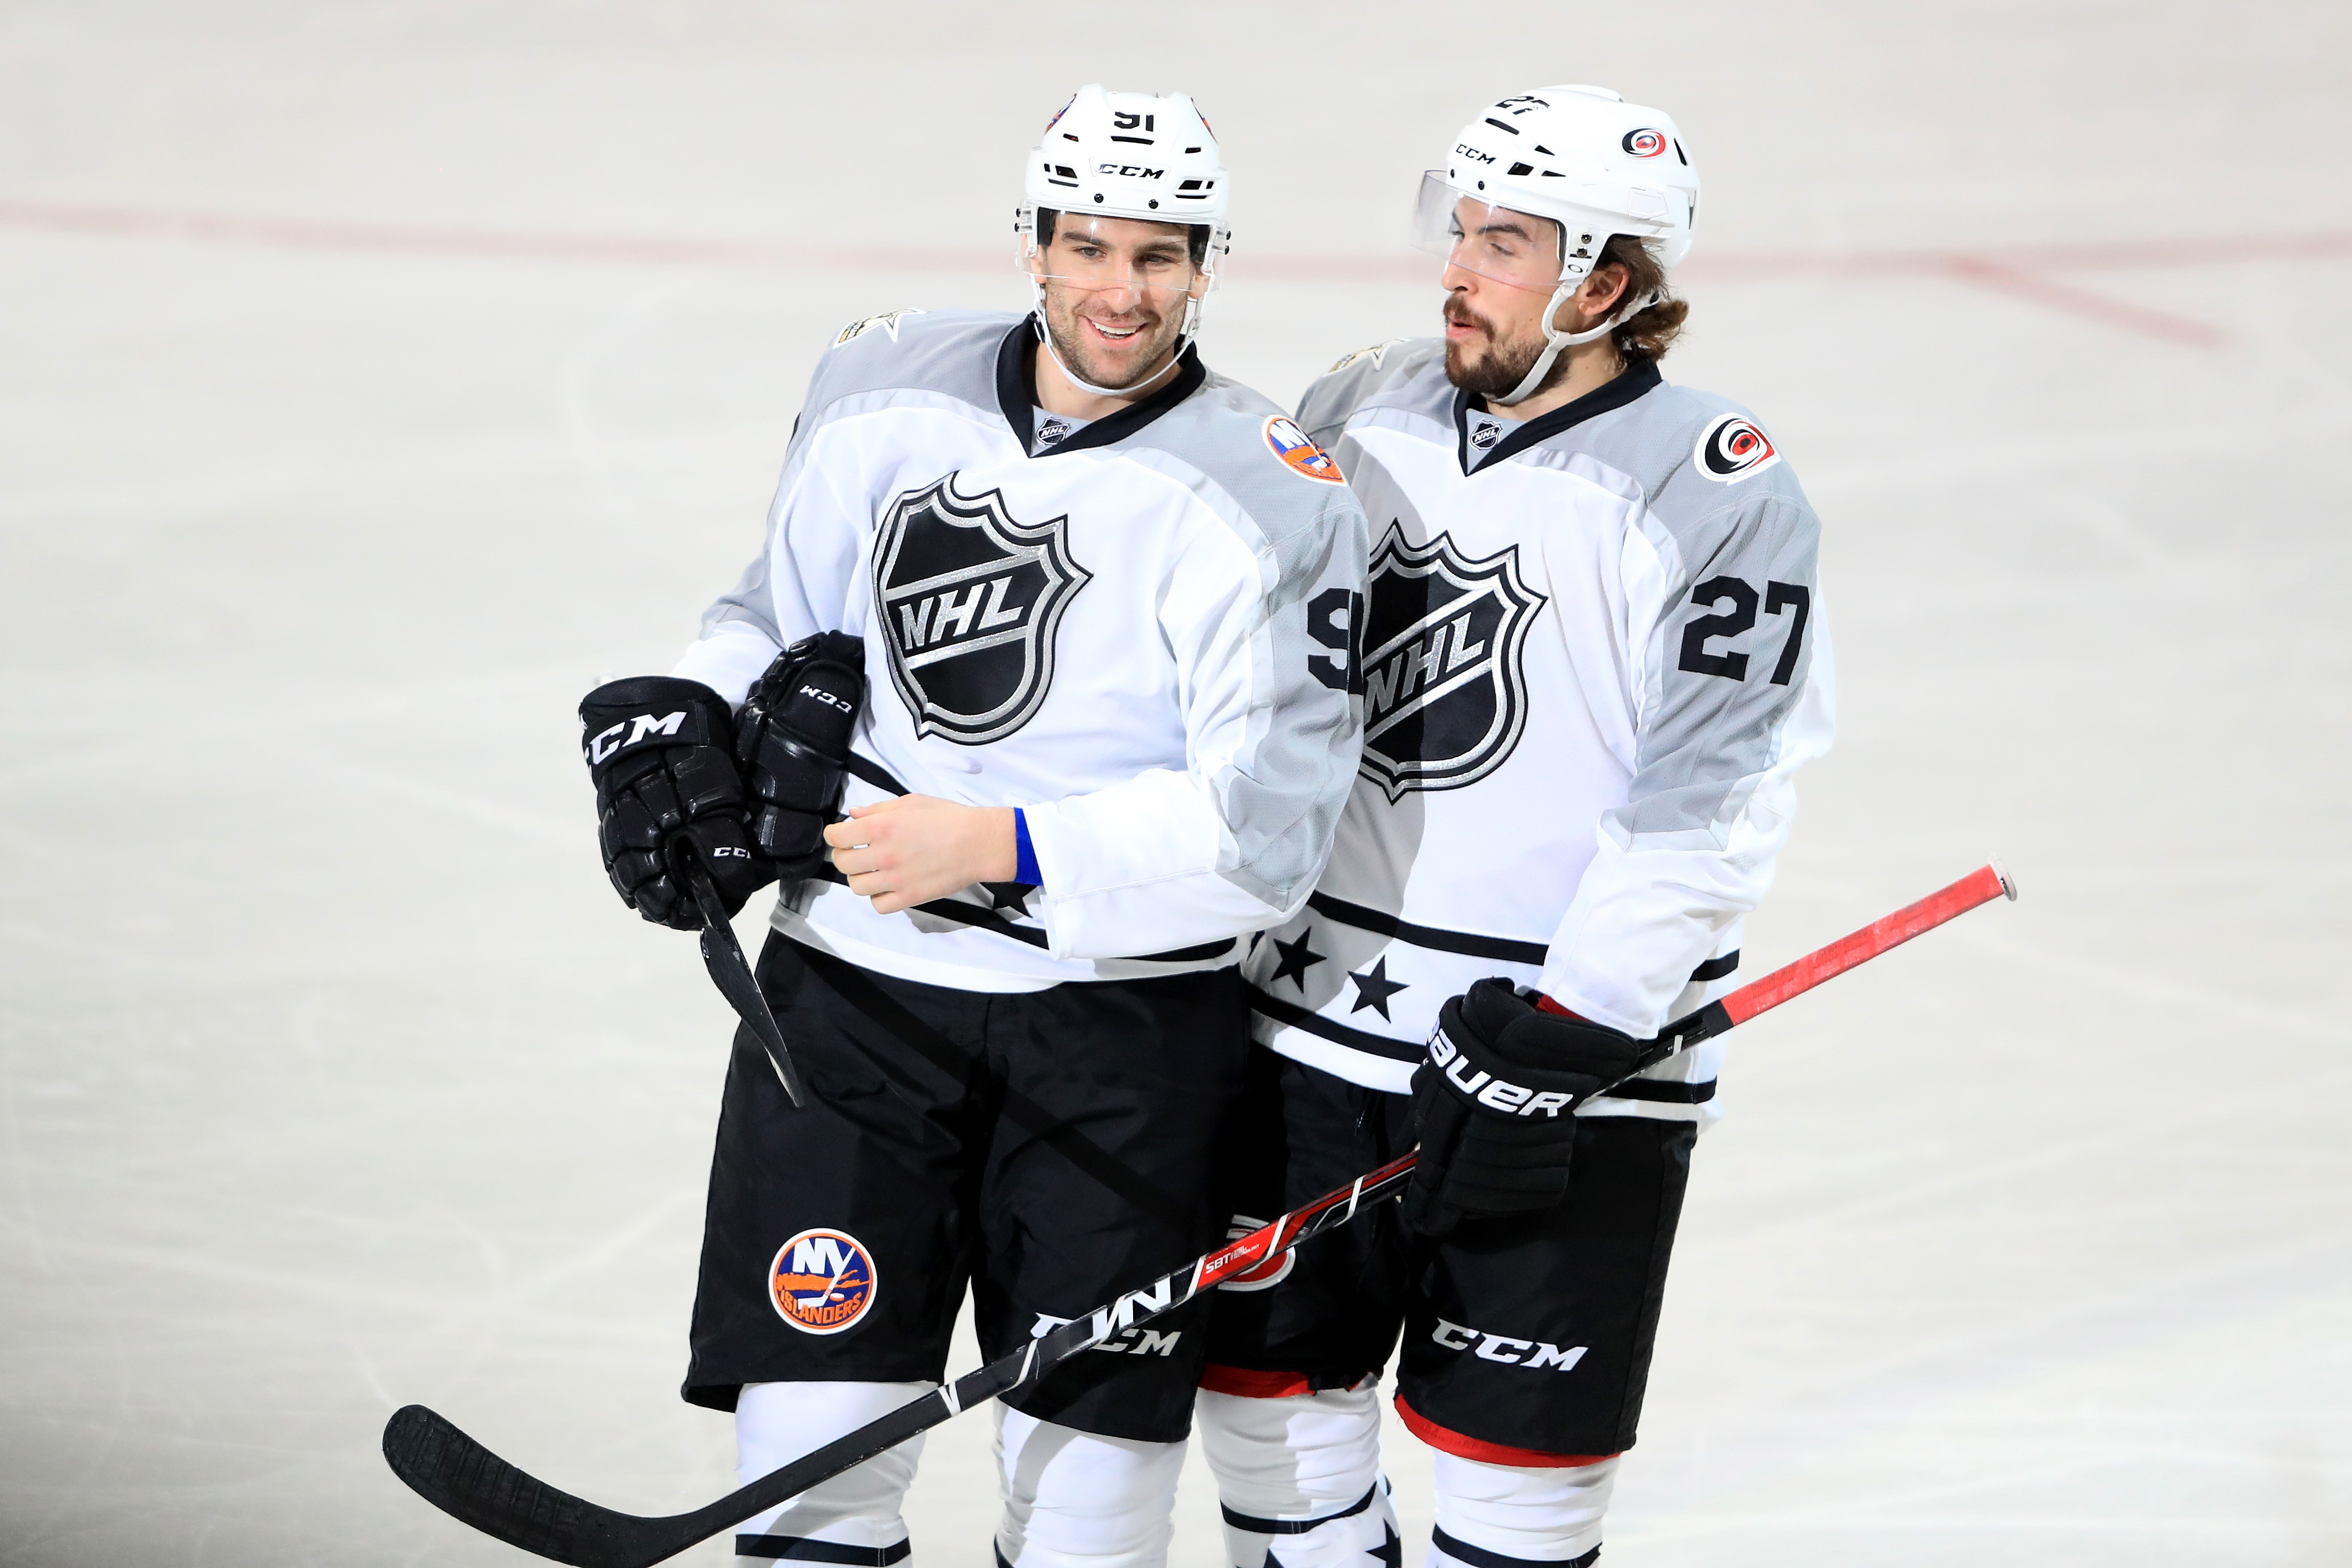 LOS ANGELES, CA - JANUARY 29: John Tavares #91 of the New York Islanders celebrates with Justin Faulk #27 of the Carolina Hurricanes after scoring a goal during the 2017 Honda NHL All-Star Game Semifinal #2 (Atlantic vs. Metropolitan) at Staples Center on January 29, 2017 in Los Angeles, California. (Photo by Sean M. Haffey/Getty Images)